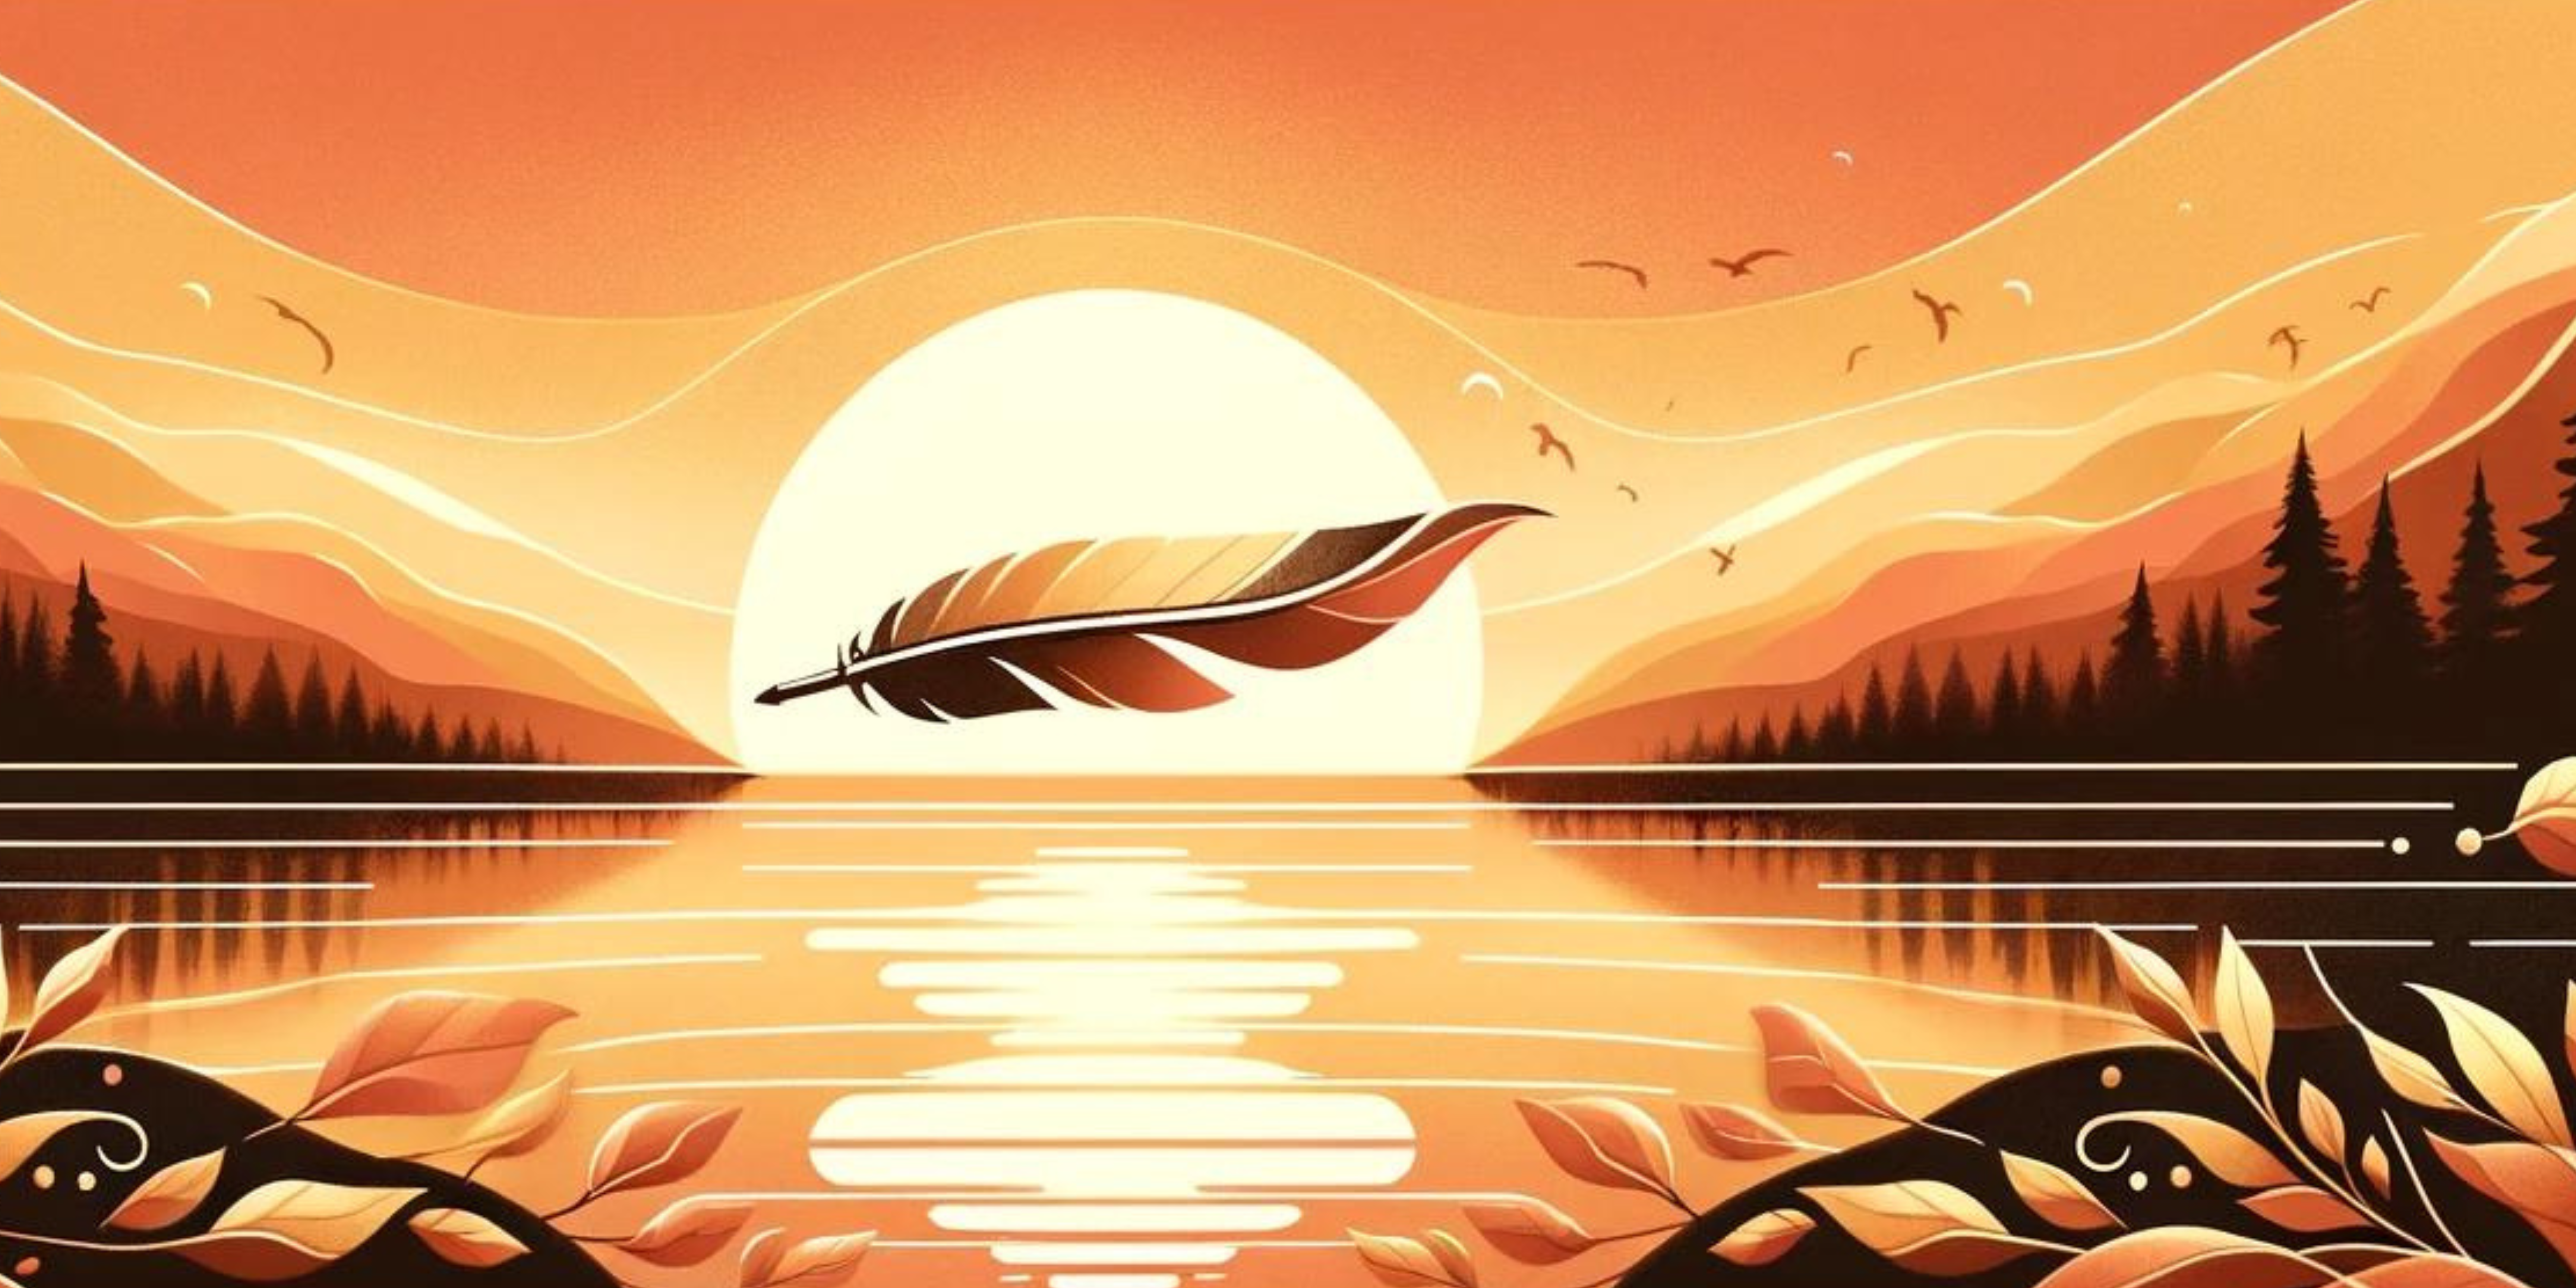 branded image header for main website page a quill on ins side in the sunset with a lake and leaves in a sunset palette colors for Belinda Sharland Home Page